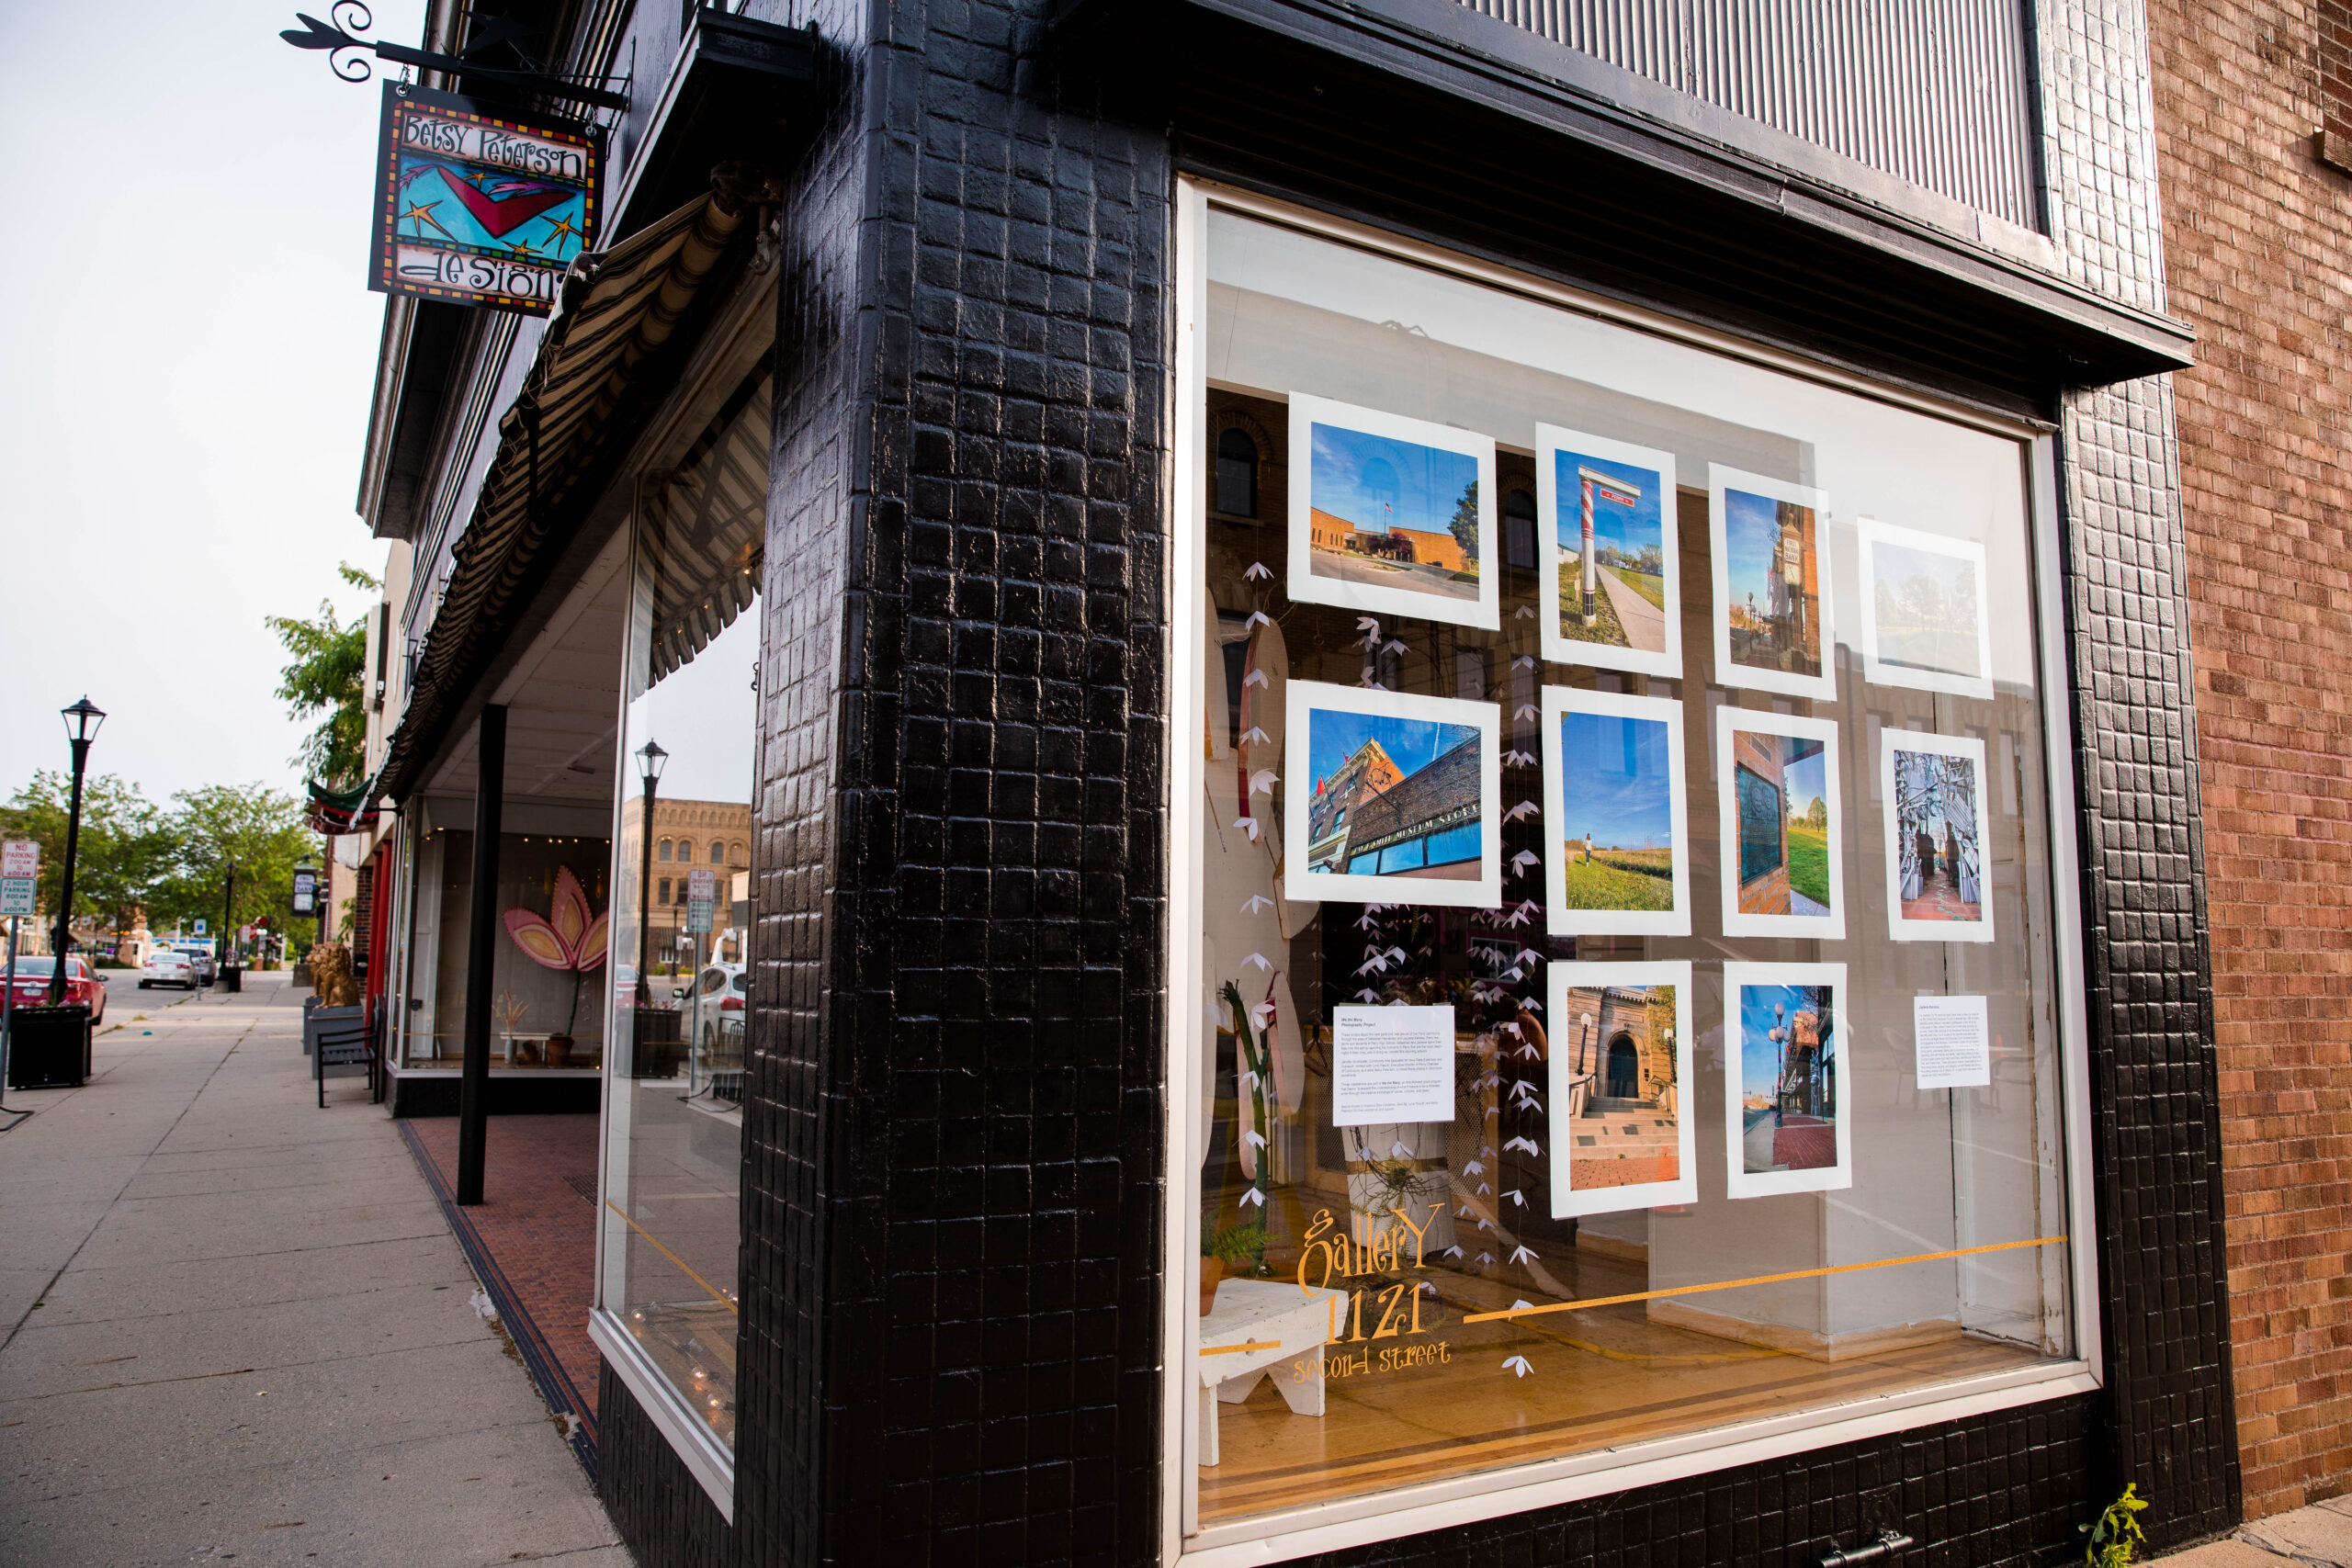 Photographs hang on the window of an art gallery with a shop sign labeled "Betsy Peterson Design."